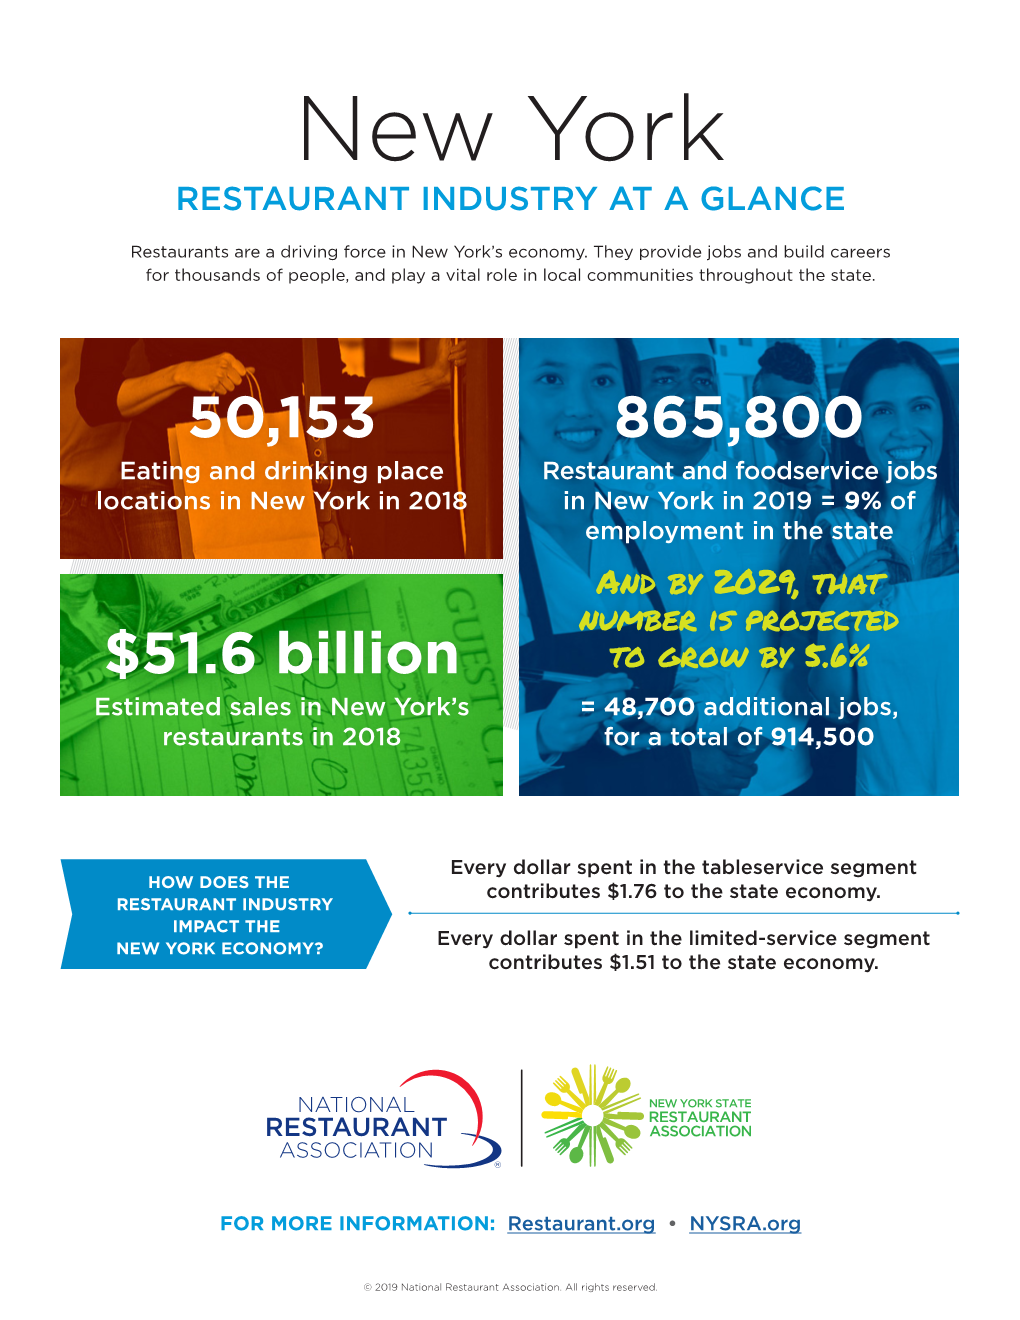 New York RESTAURANT INDUSTRY at a GLANCE